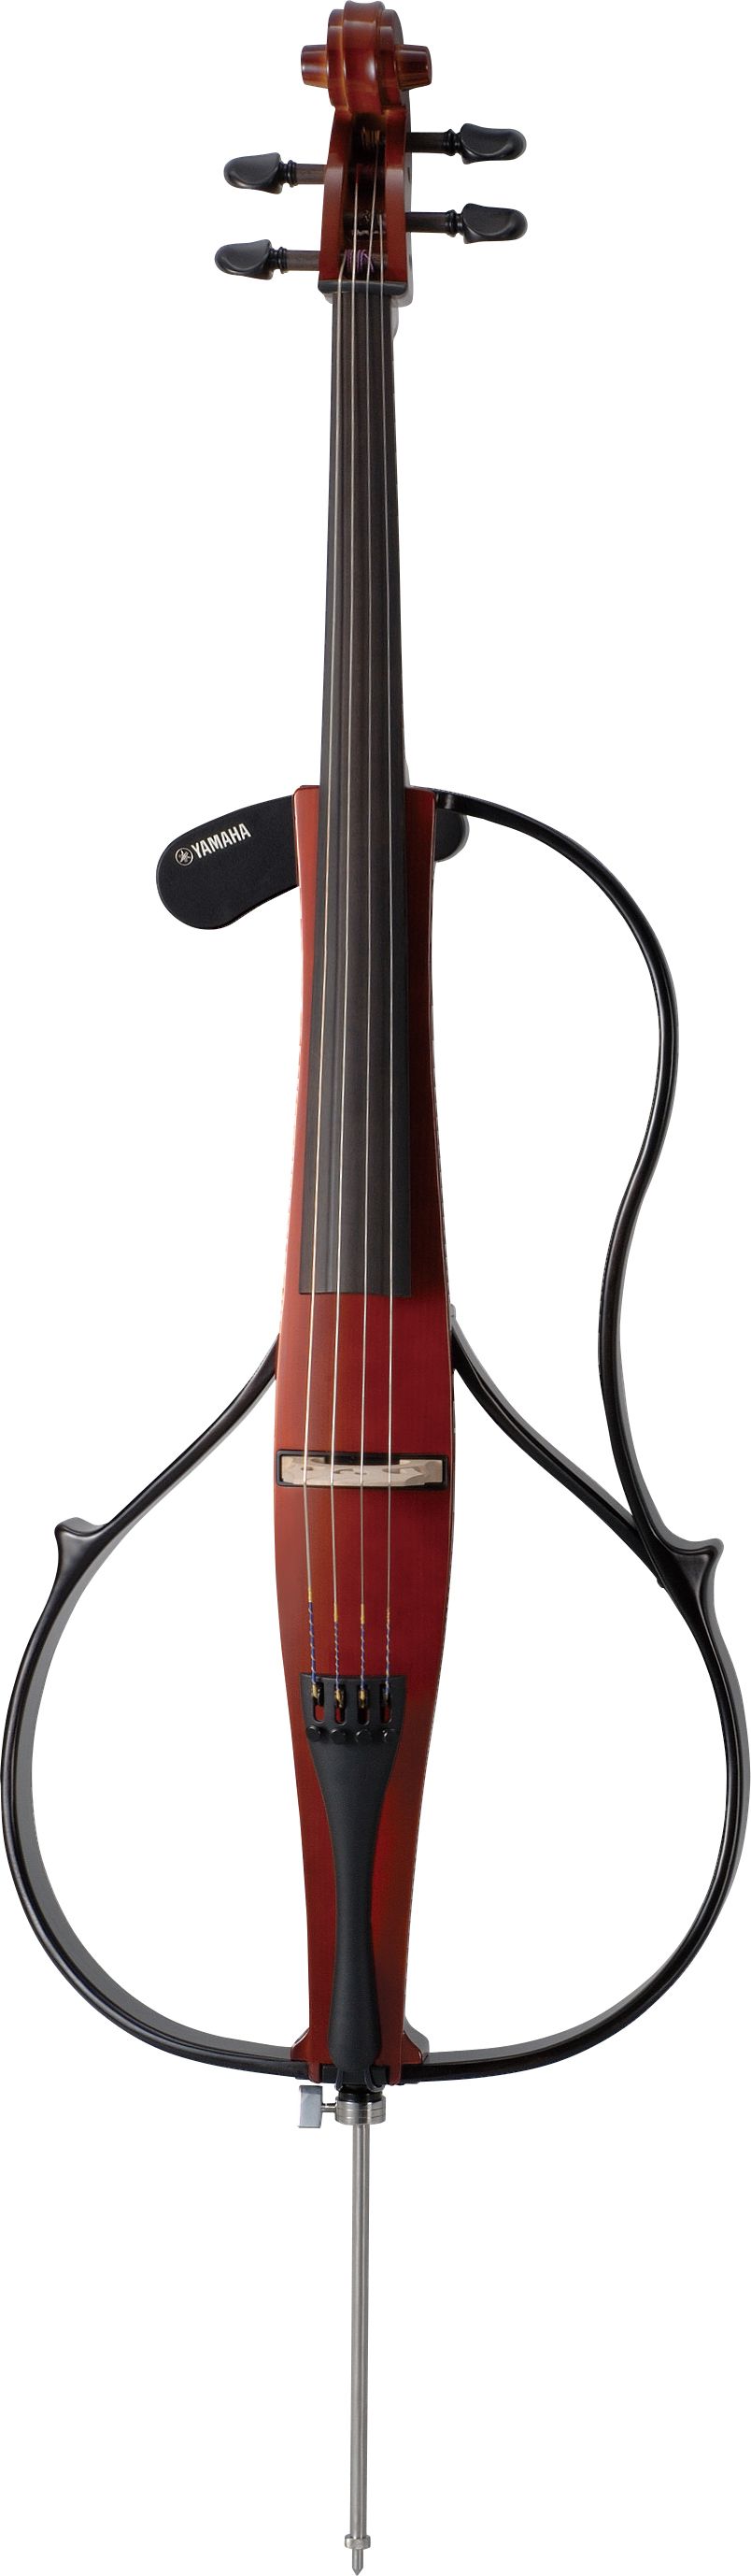 SVC-110SK - Overview - Silent™ Series Violins, Violas, Cellos, and 